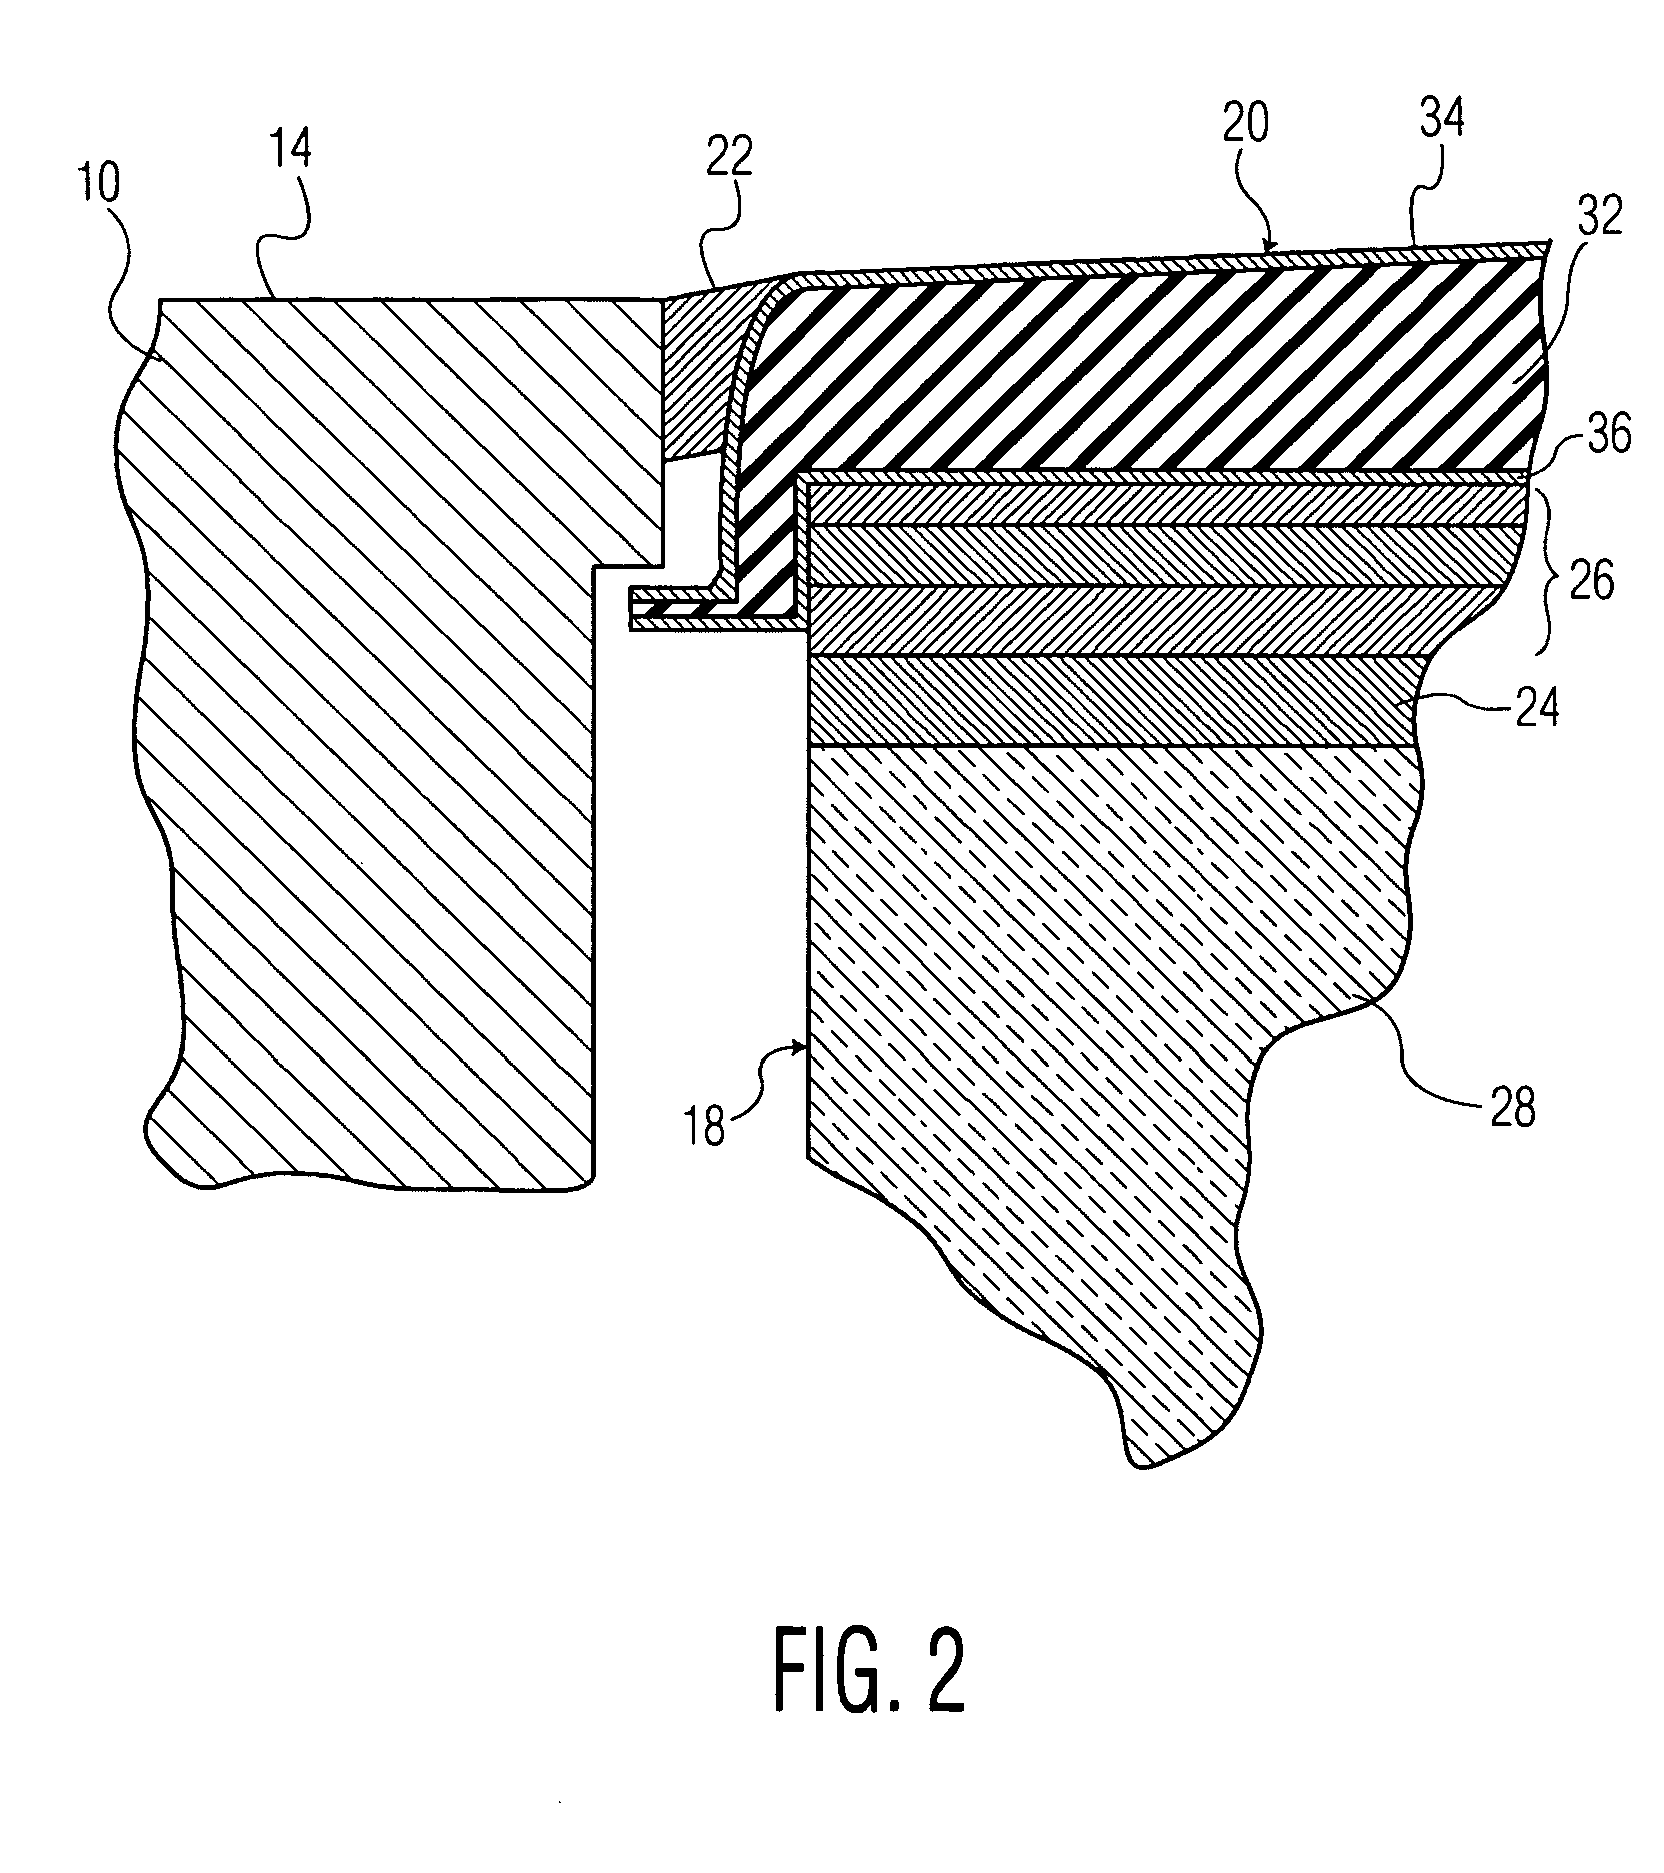 Acoustic window for ultrasound probes